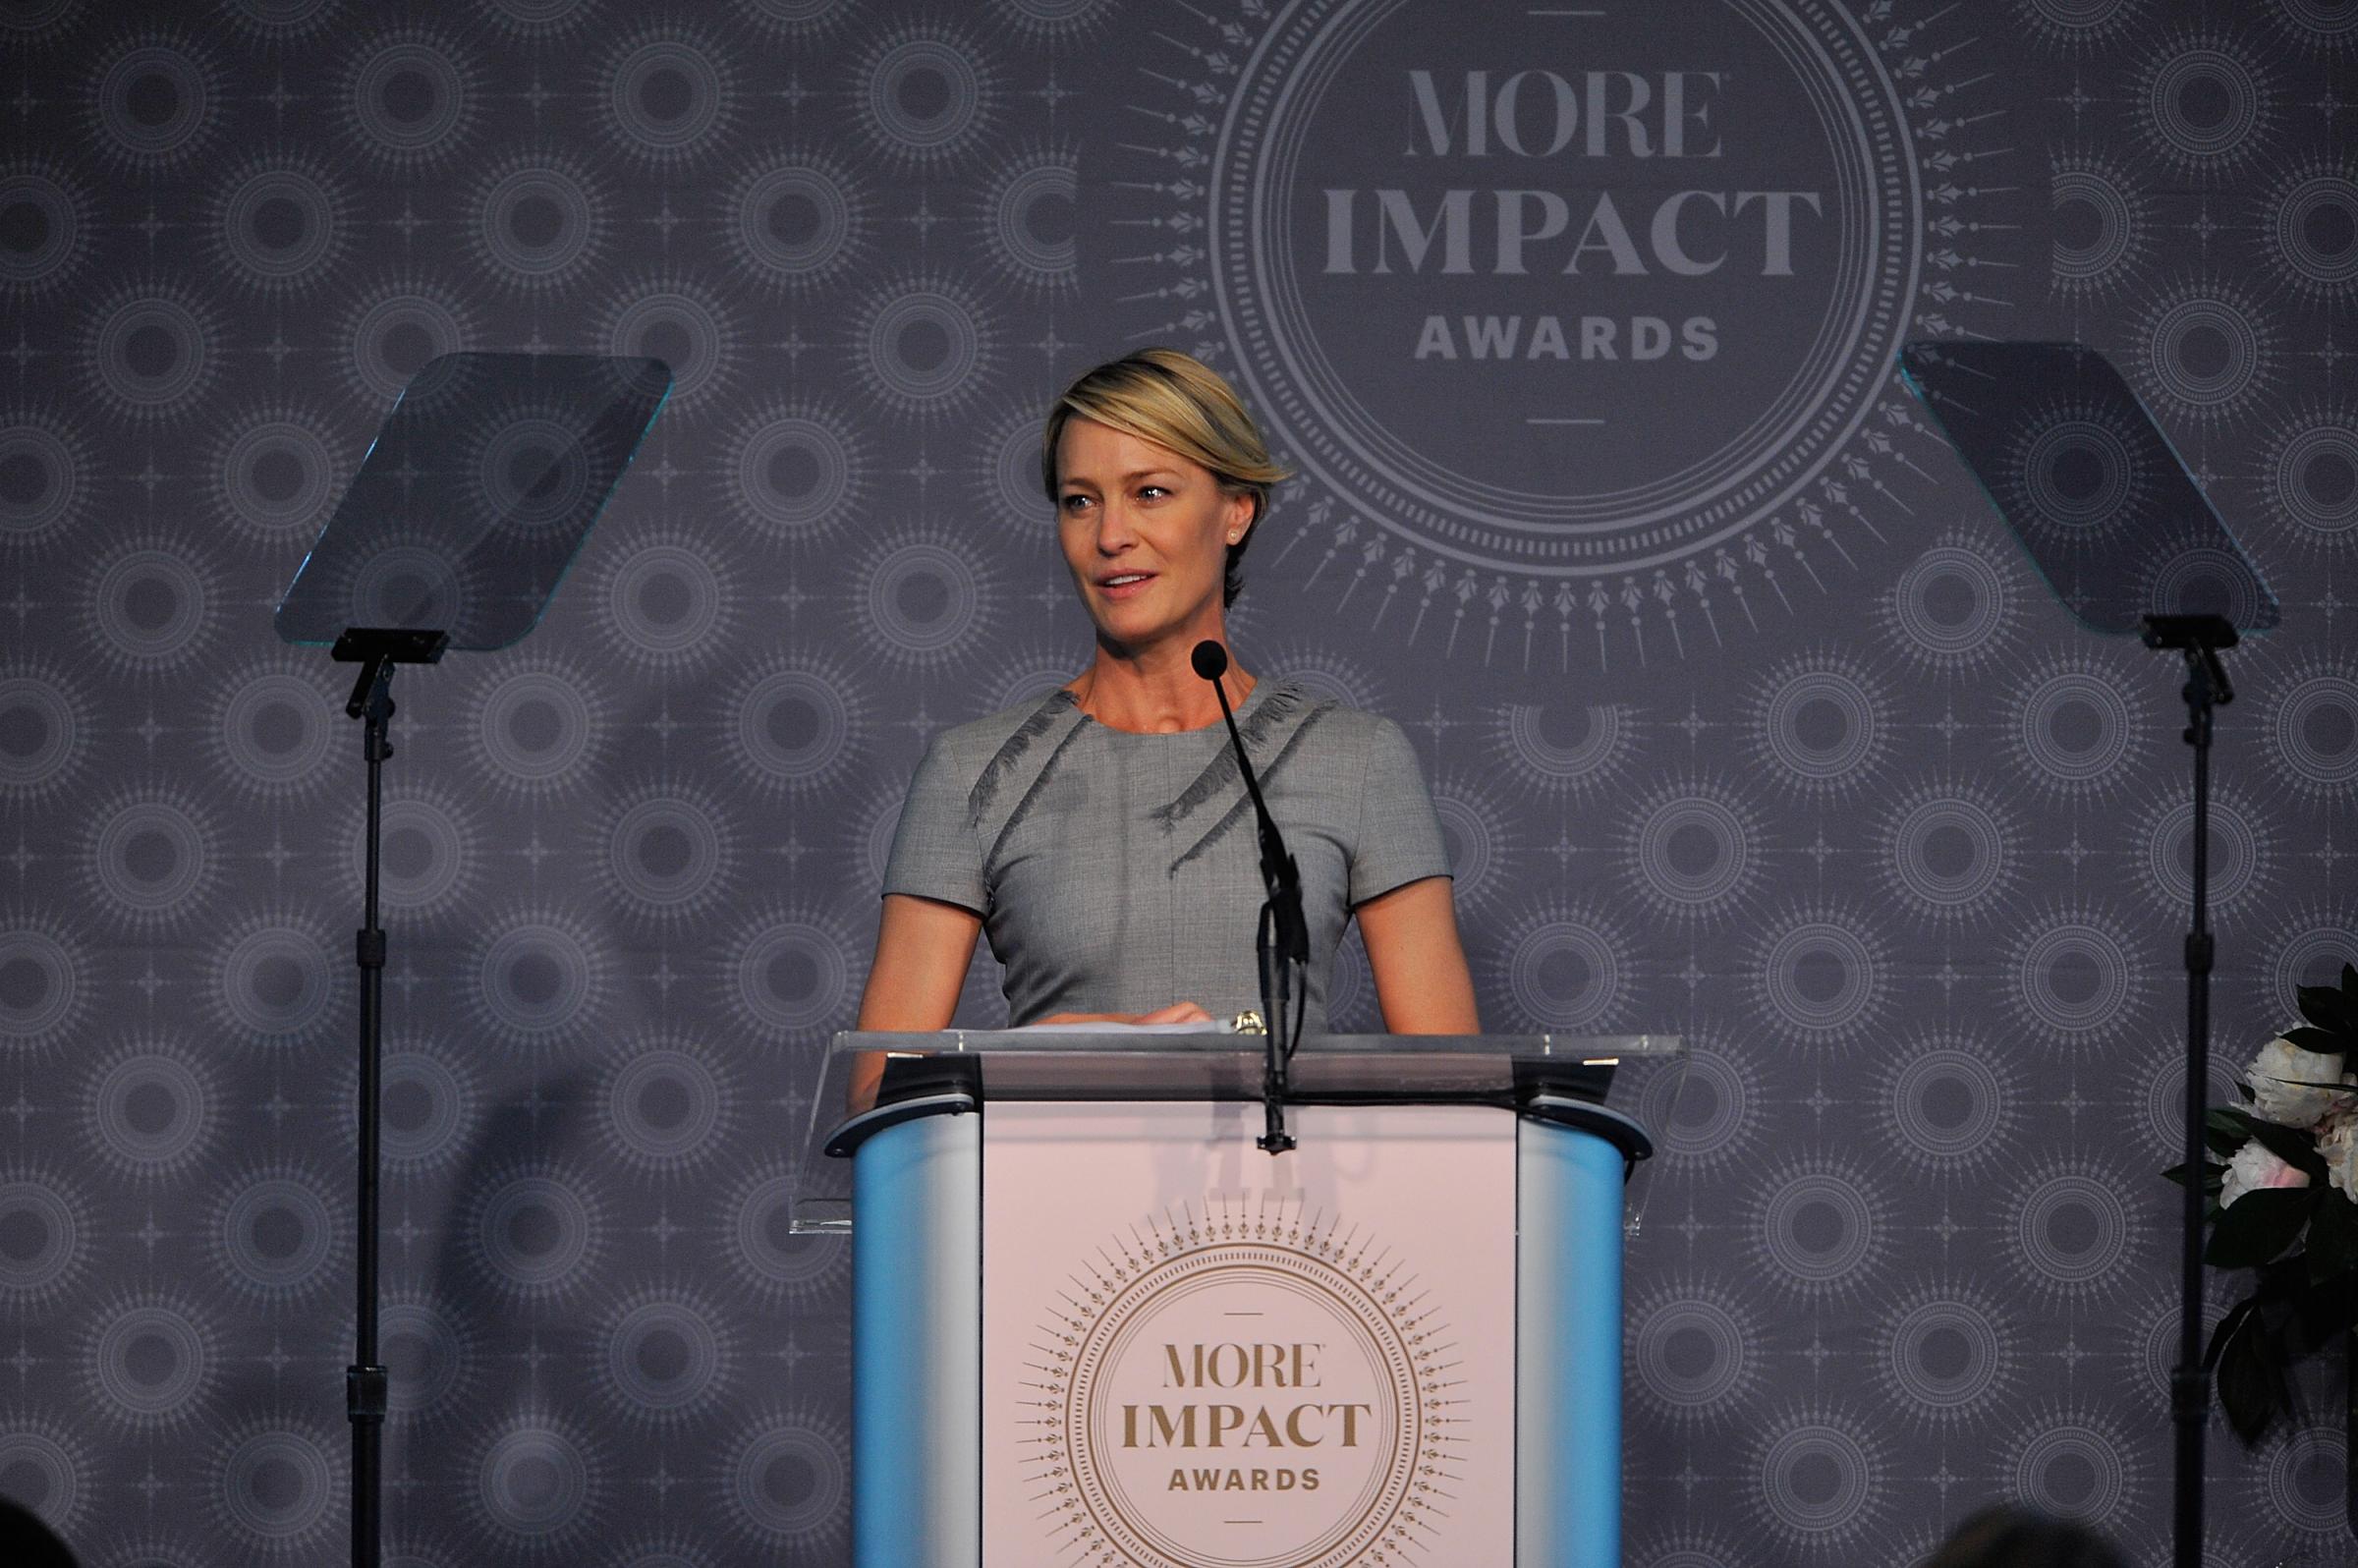 Actress Robin Wright speaks at the 2015 MORE Impact Awards Luncheon at The Newseum on June 29, 2015 in Washington, DC.